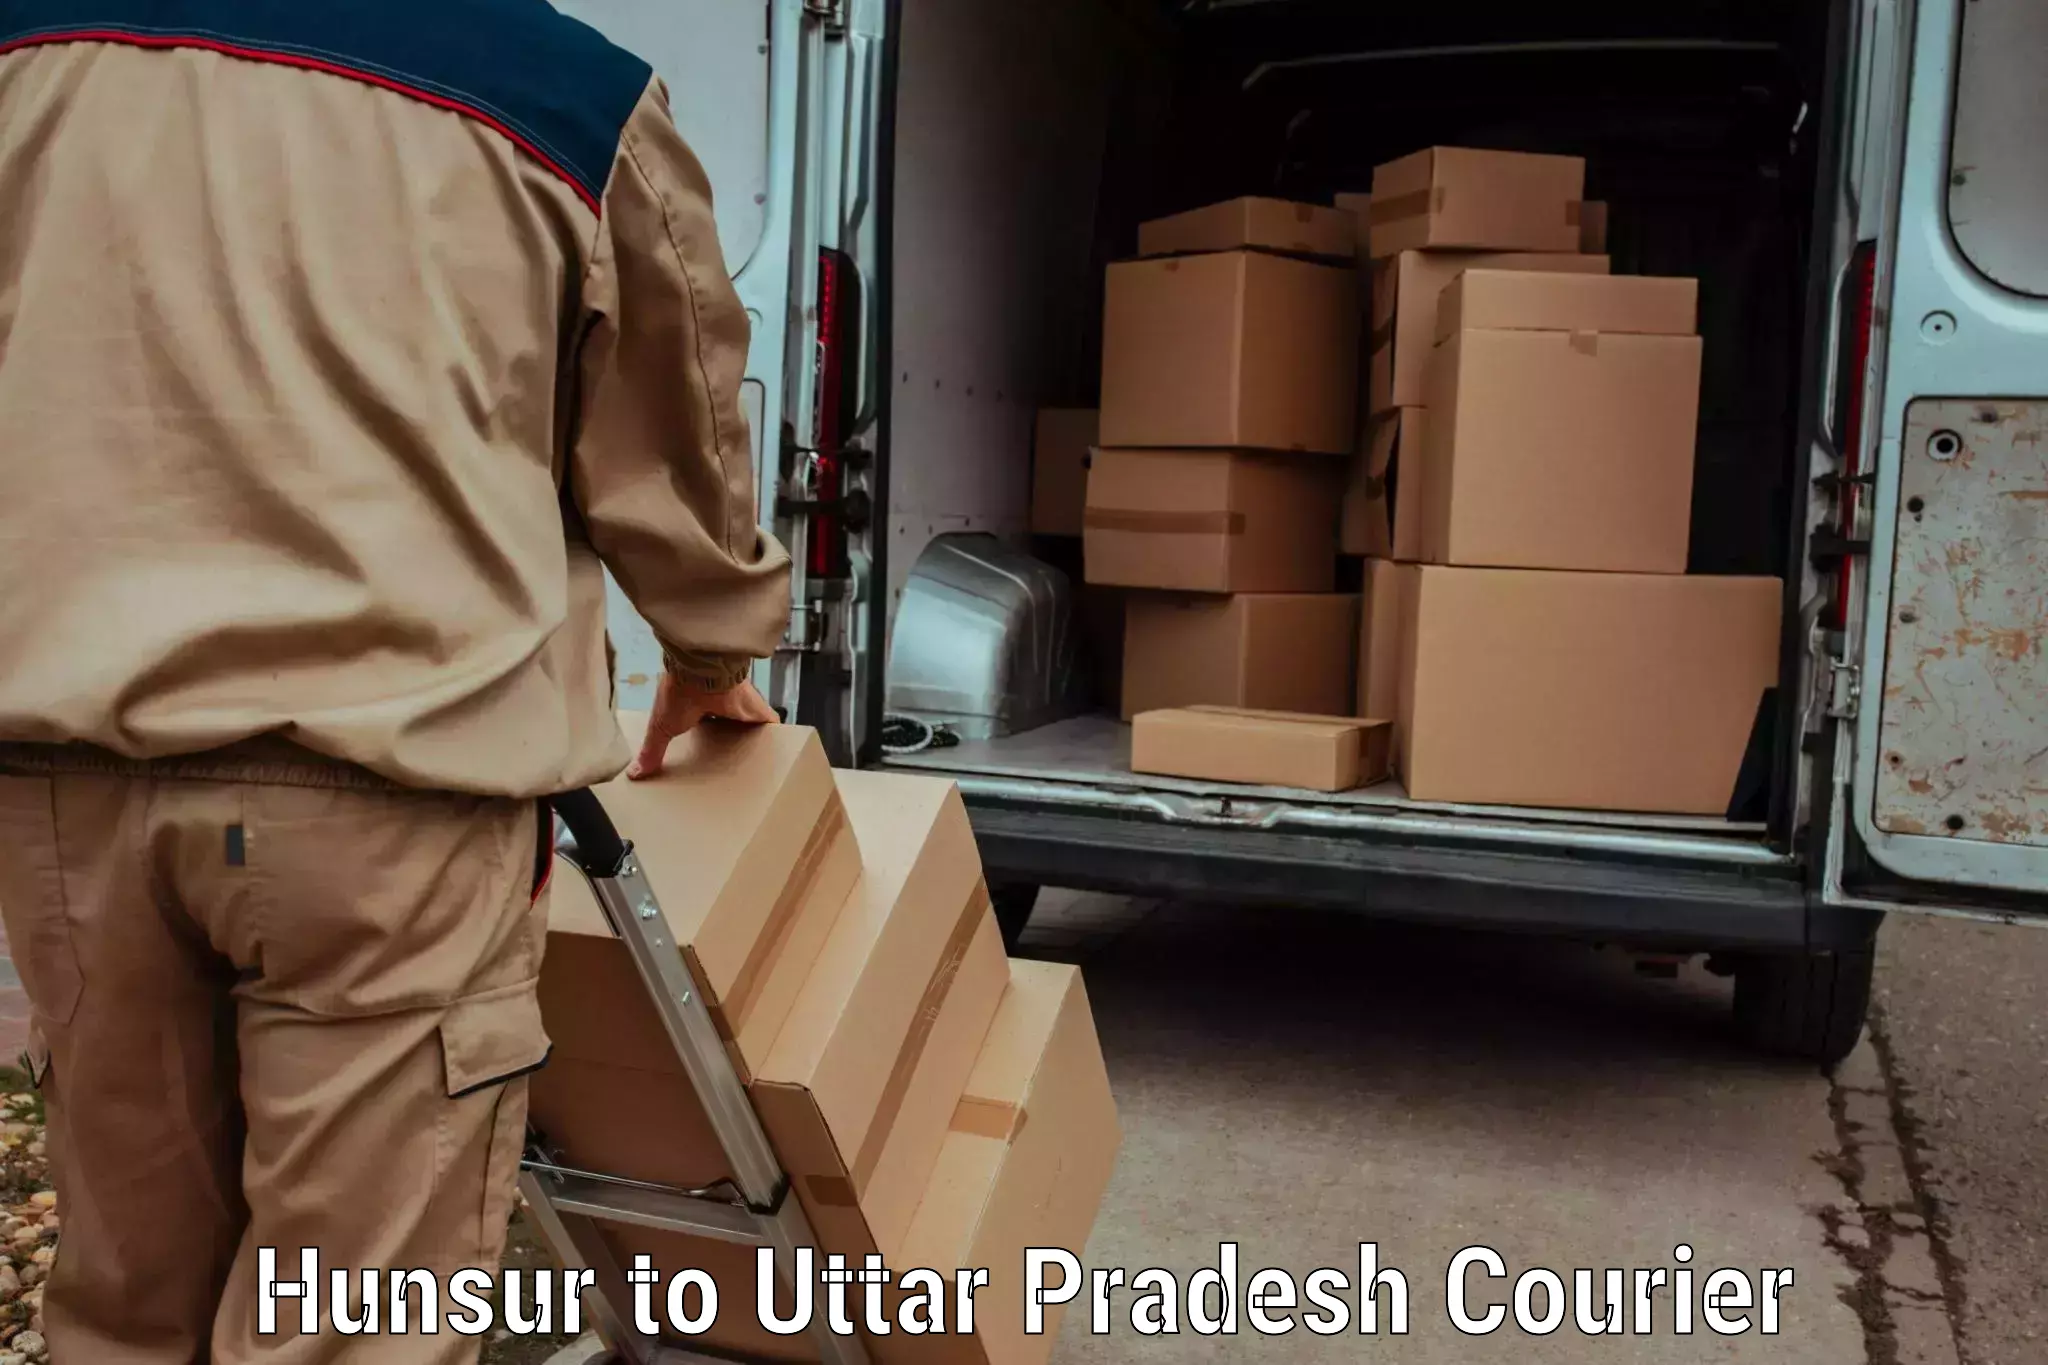 Next day courier Hunsur to Lalitpur